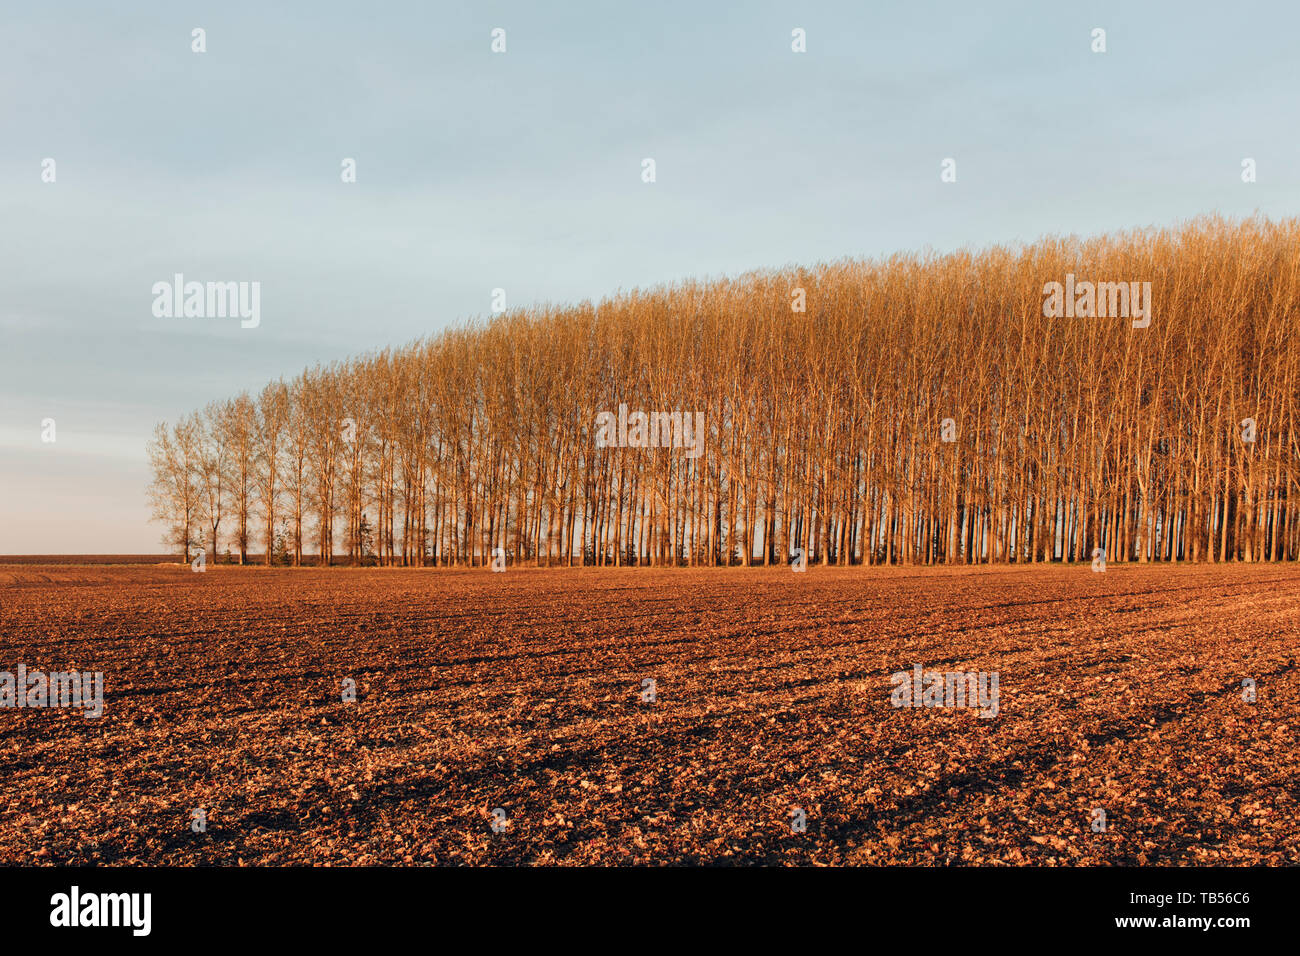 Stand of trees in a rural landscape, and a ploughed field after the harvest, autumnal feel, commercial arborial tree plantation Stock Photo